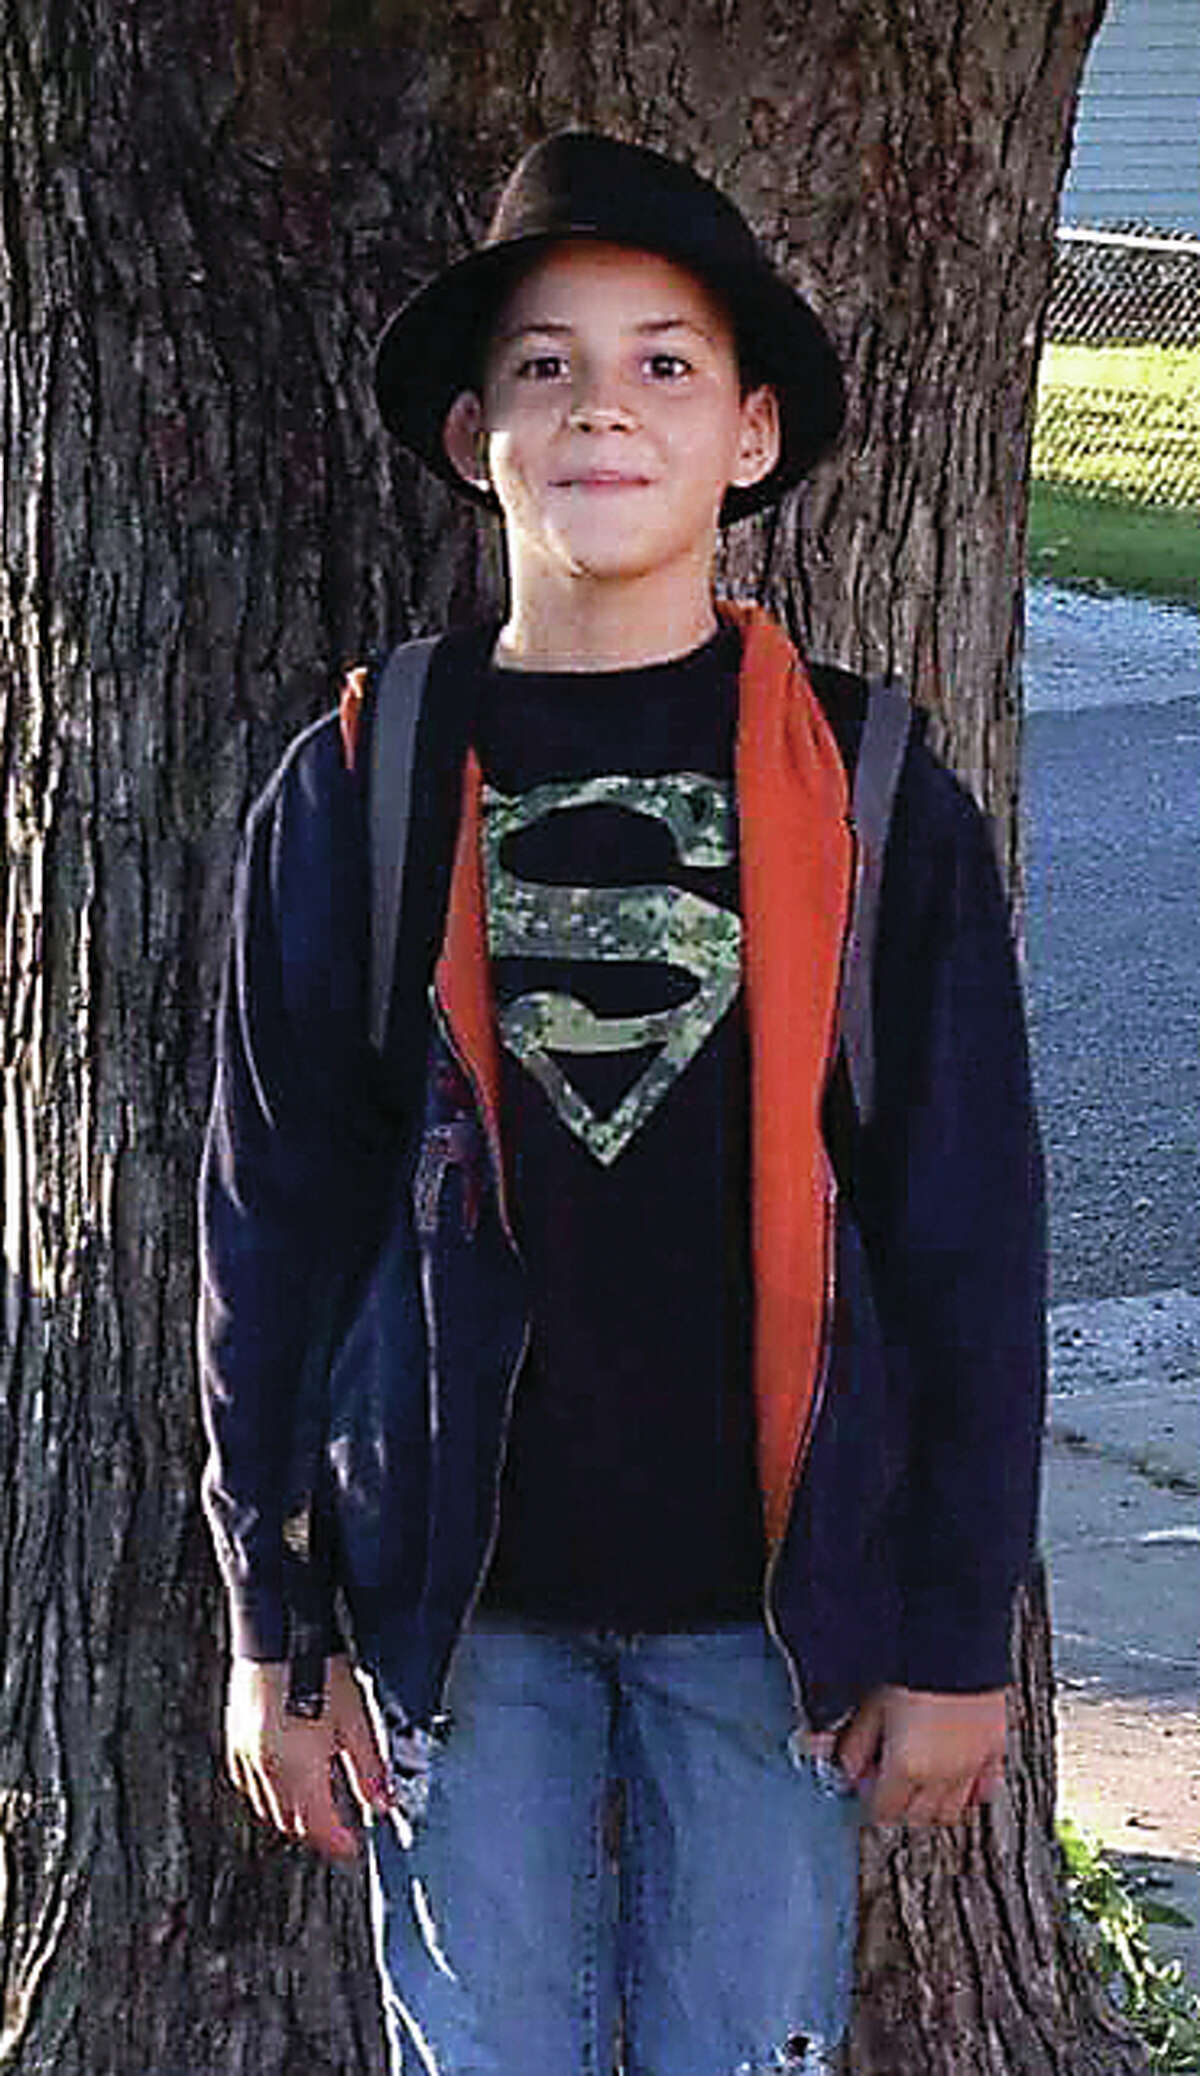 Shane Laycock, an 11-year-old Bethalto boy struggling with autism, took his own life on Thursday, Nov. 12. Friends of the family have arranged a march to remember Shane and to raise awareness for autism.